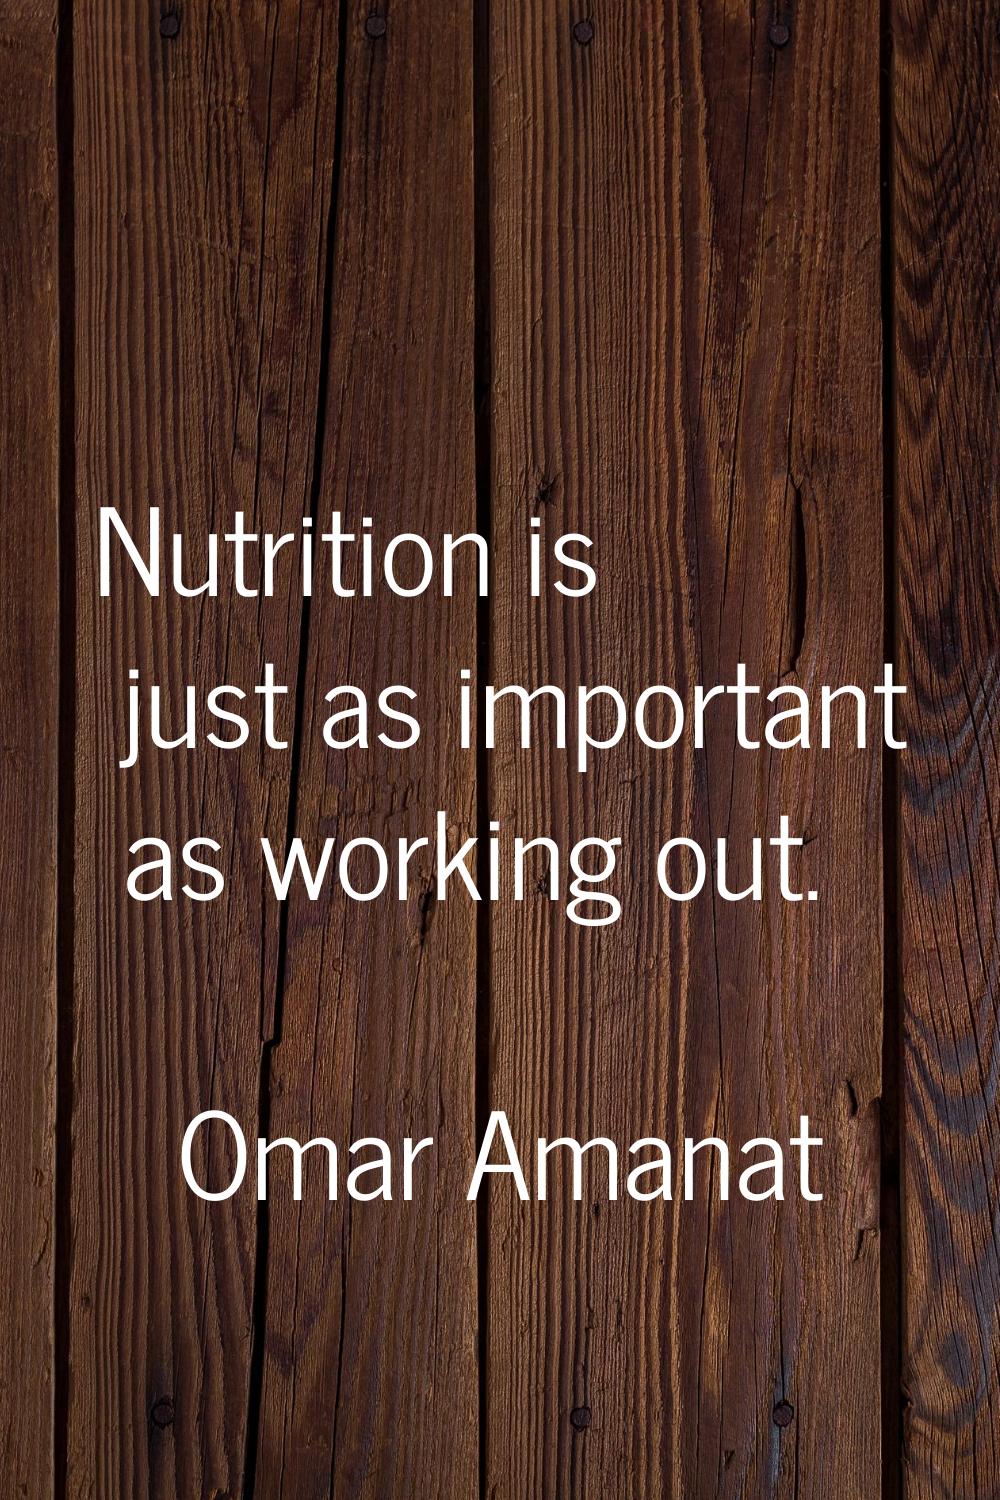 Nutrition is just as important as working out.